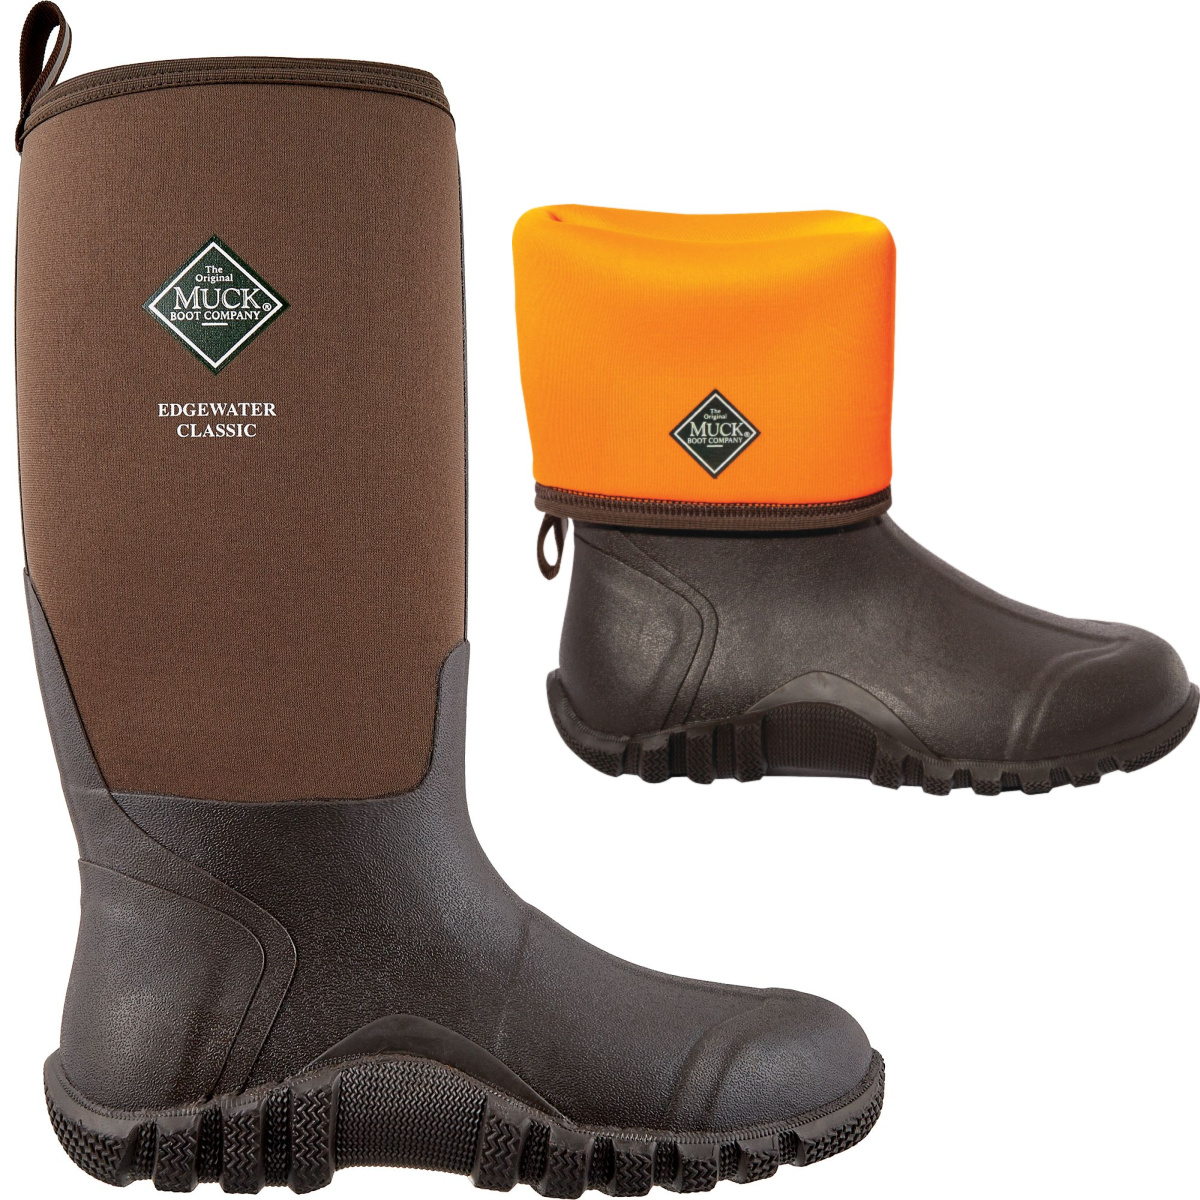 muck boots at dick's sporting goods